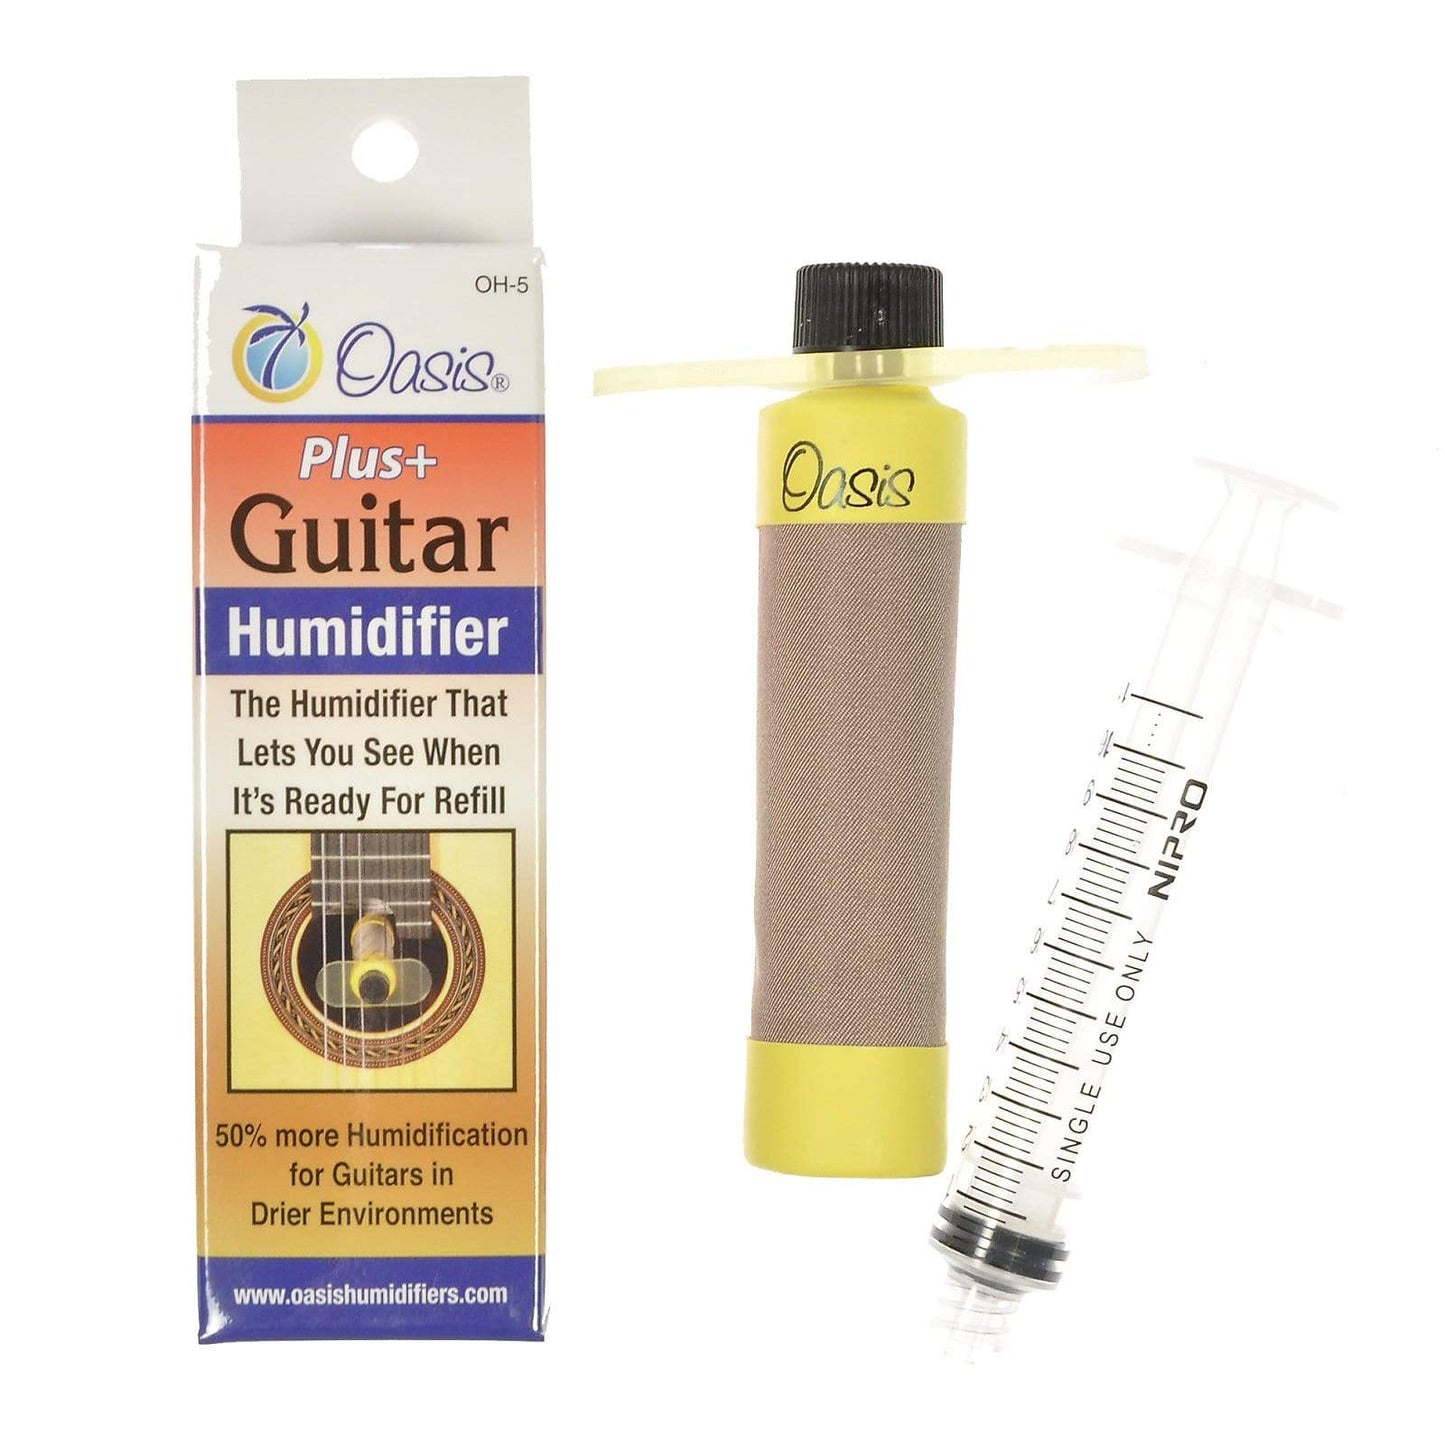 Oasis OH-5 Guitar Plus+ Humidifier Accessories / Humidifiers